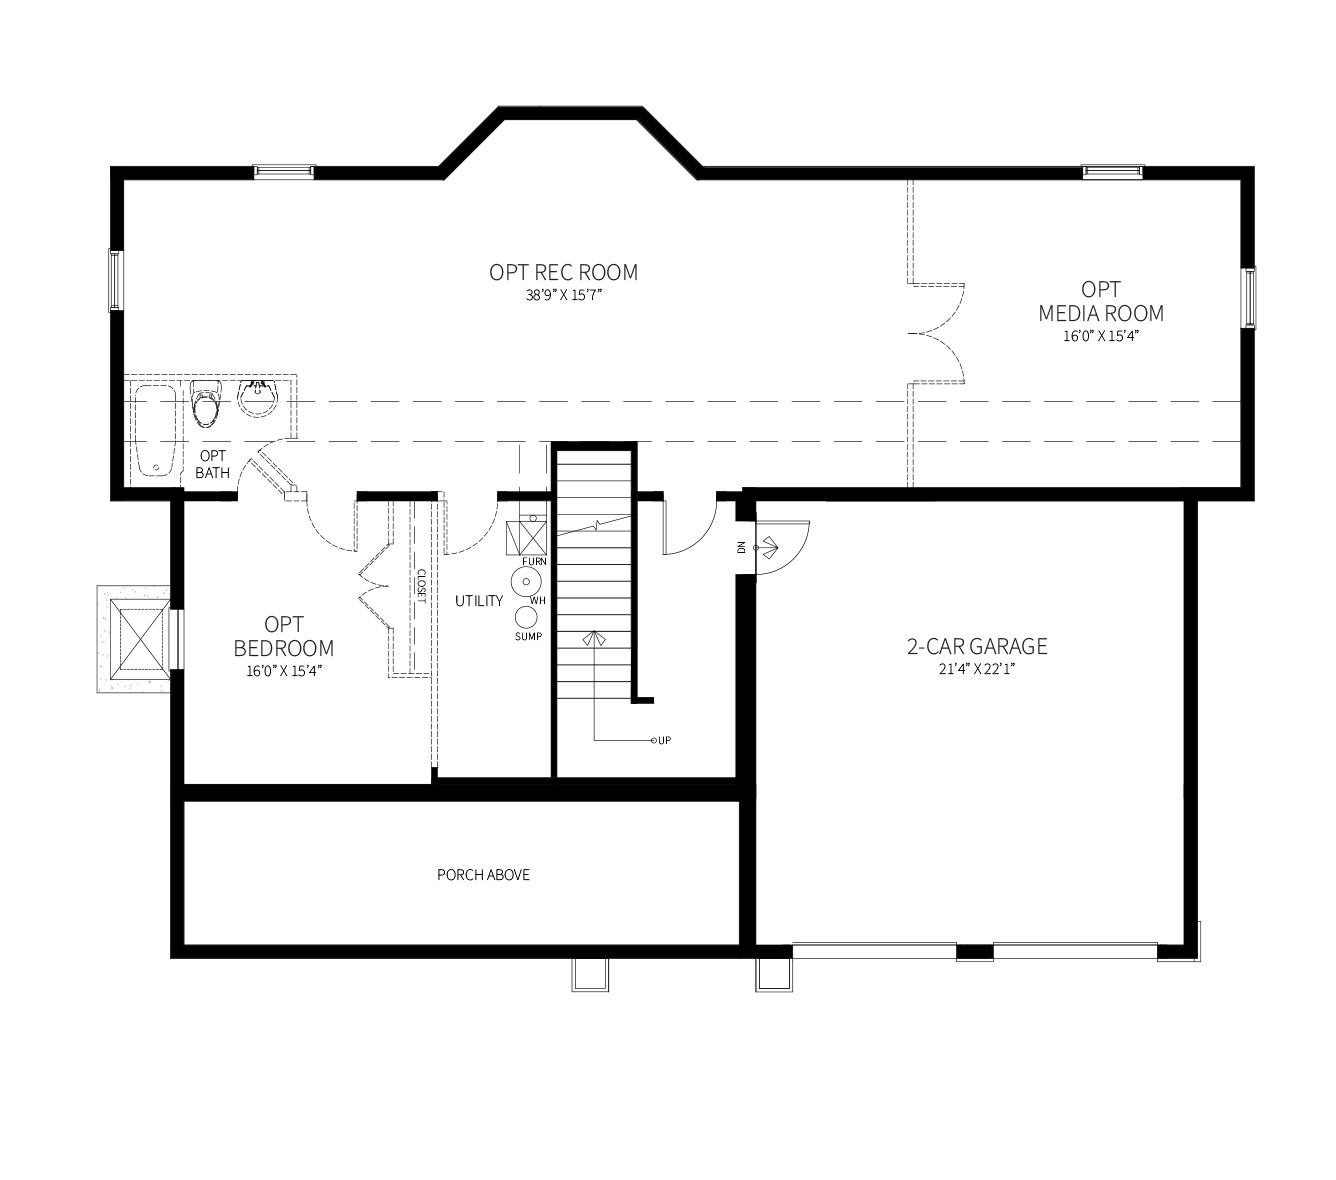 A proposed optional Basement plan for the Rosedale featuring a Rec Room, Media Room and Bedroom with Bath.